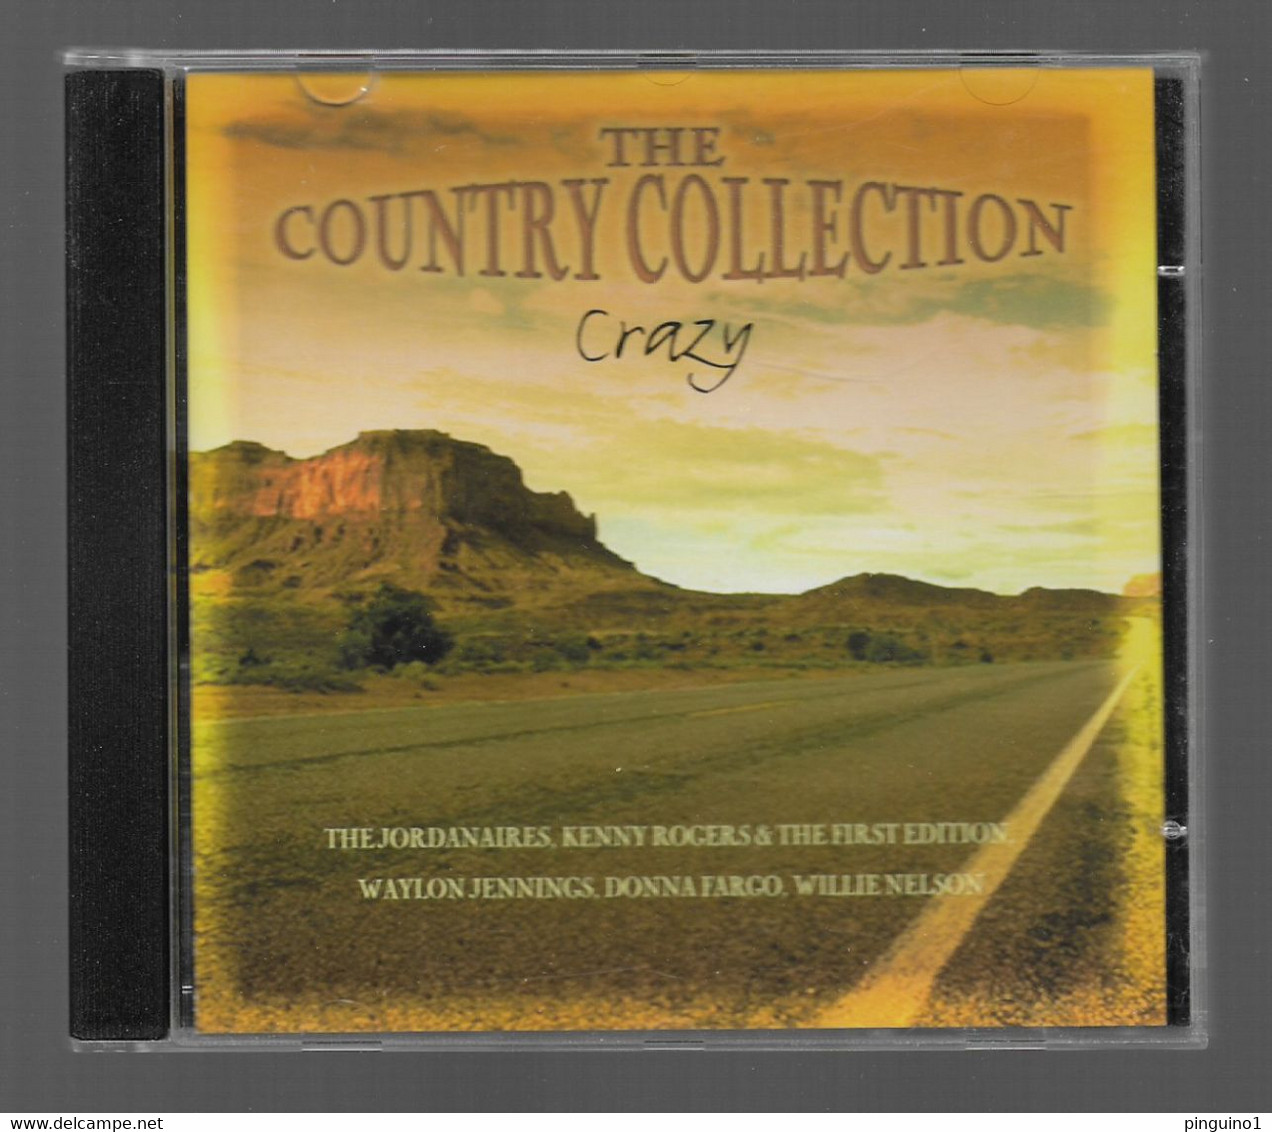 Country & Western Cd 7 Volumes - Country & Folk